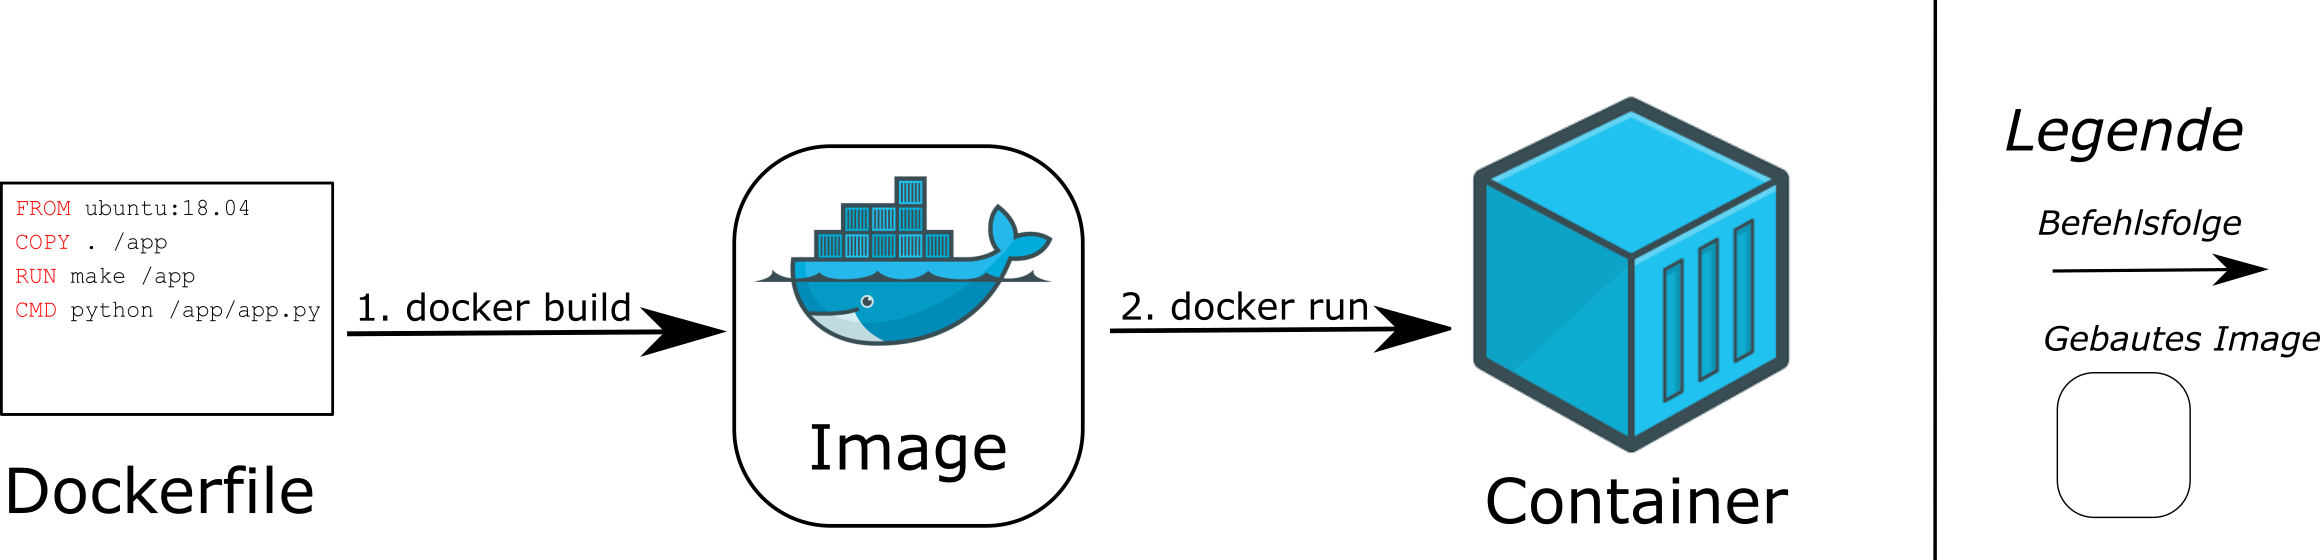 Docker to Container